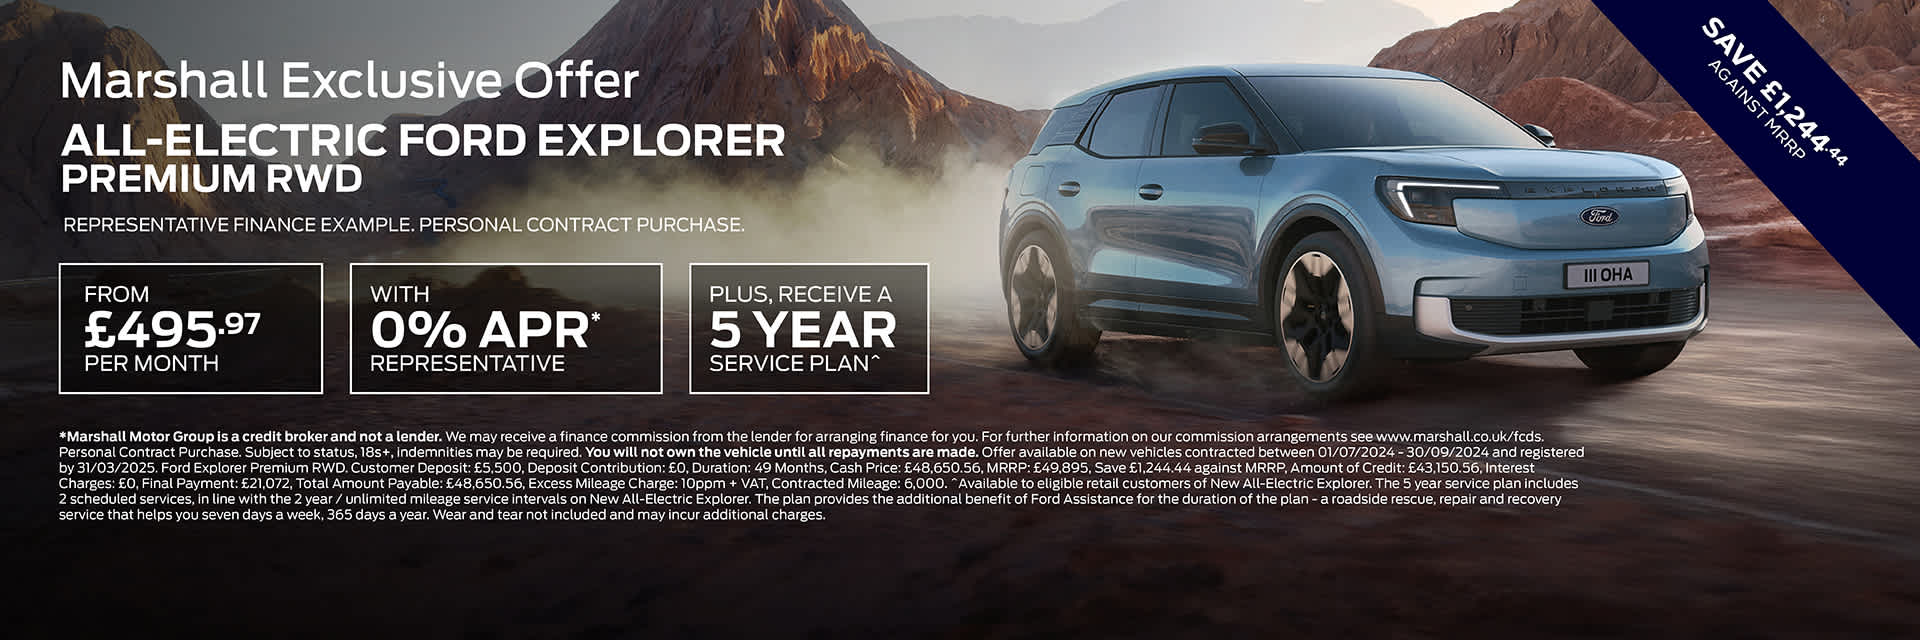 New All-Electric Ford Explorer Personal Contract Purchase Exclusive Offer